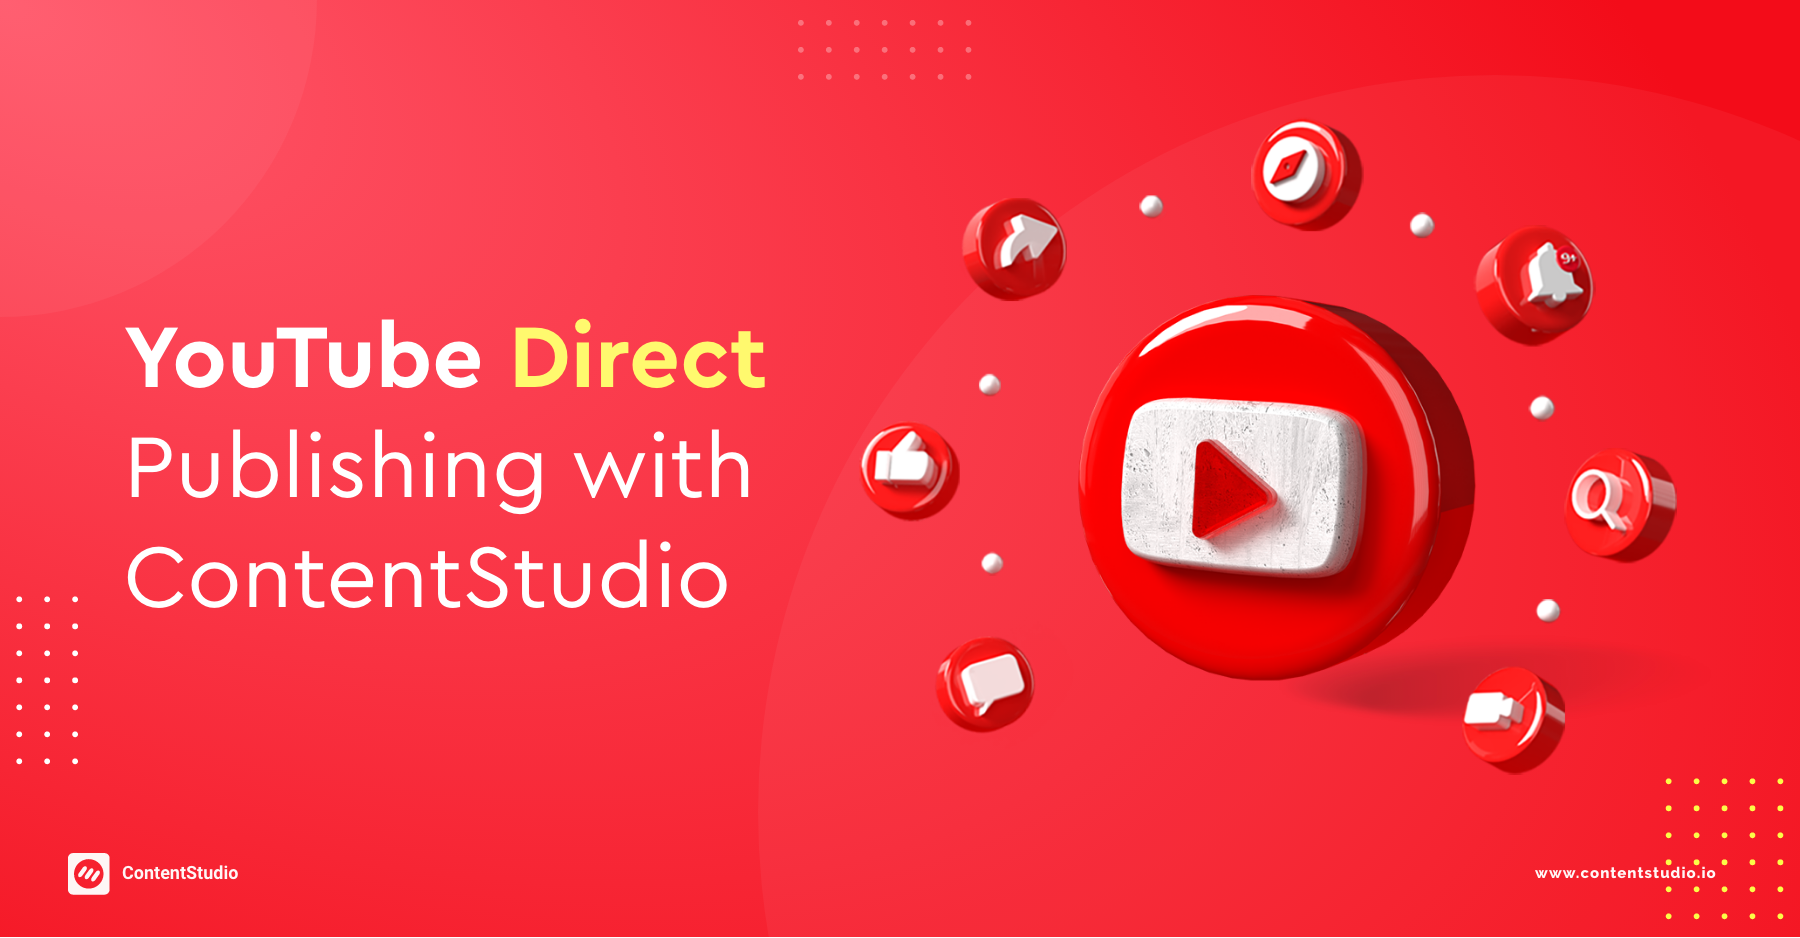 Expand your marketing to YouTube with ContentStudio – Youtube Direct Publishing